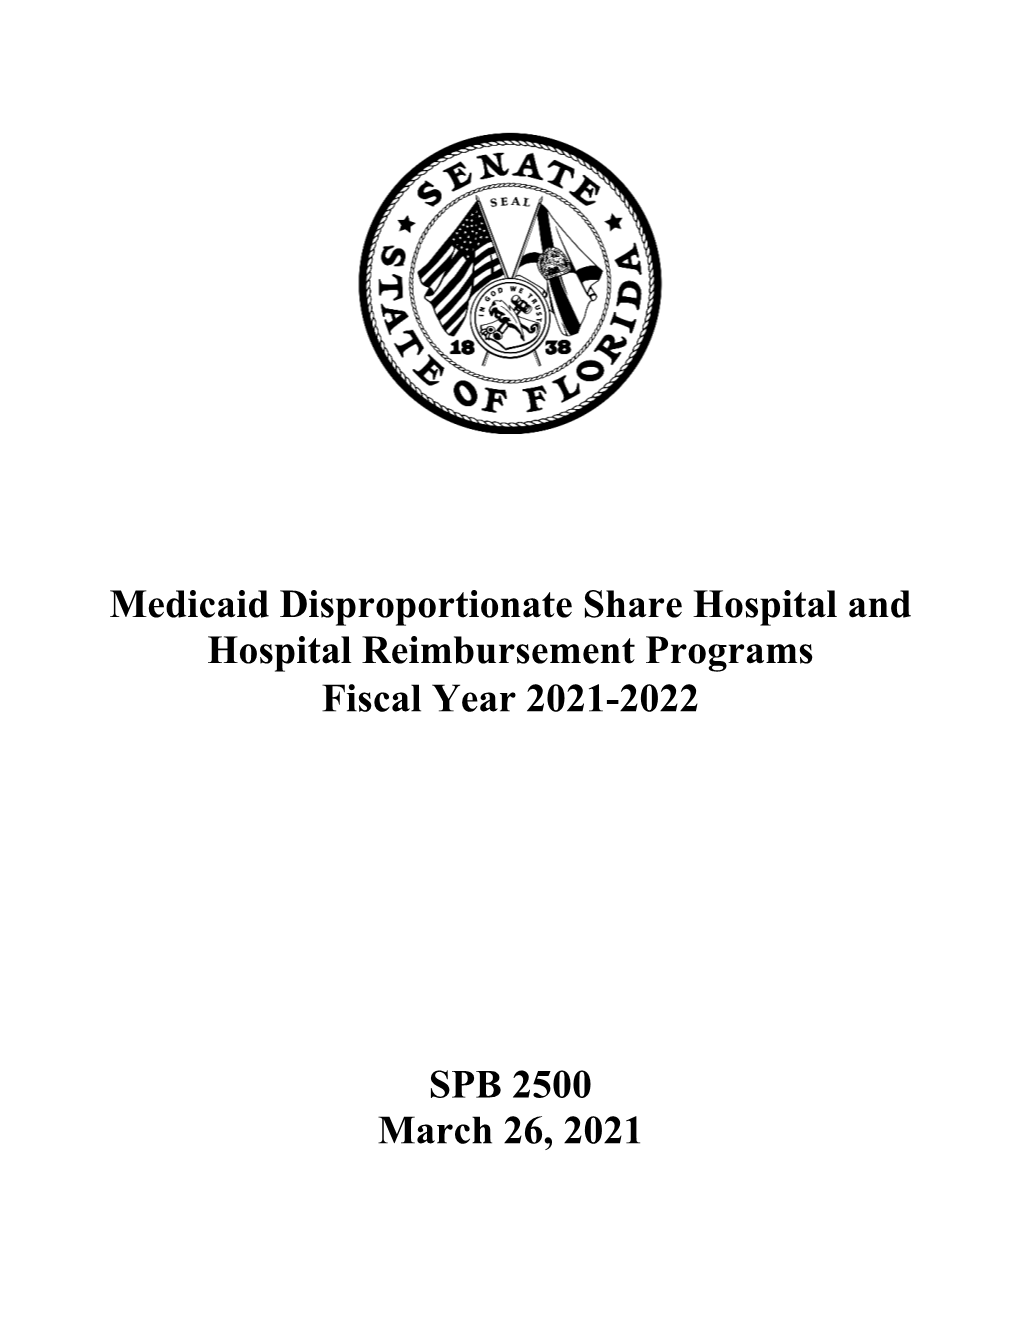 Medicaid Disproportionate Share Hospital and Hospital Reimbursement Programs Fiscal Year 2021-2022 SPB 2500 March 26, 2021